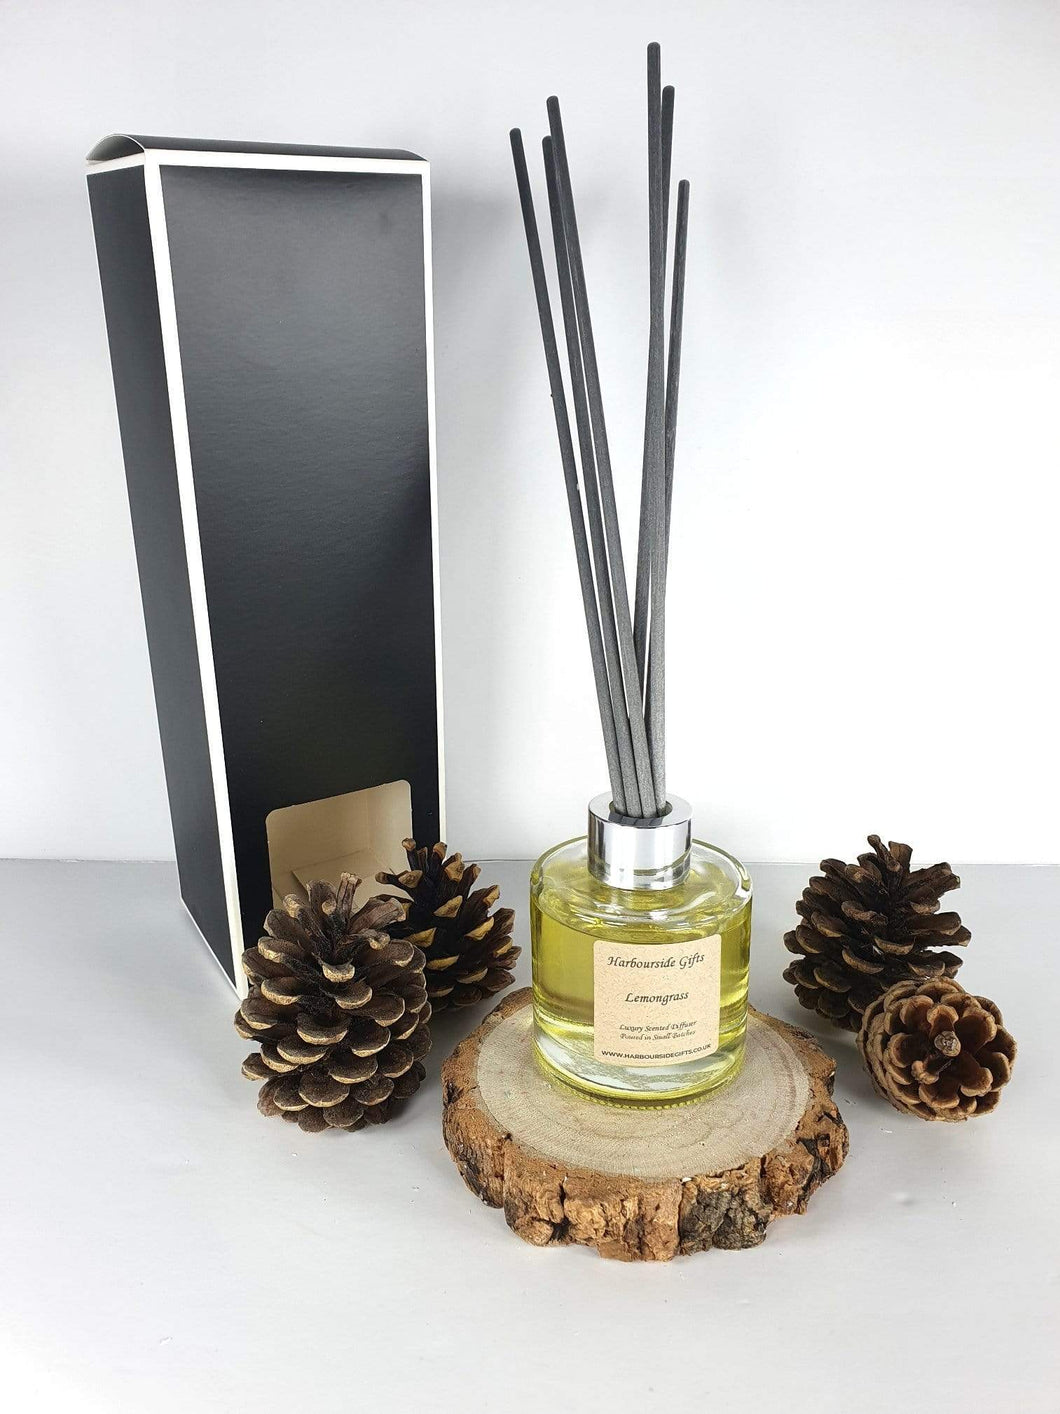 Lemongrass Scent Reed Diffuser 100ml with 6 High Quality Reeds in Gift Box LGD100 Harbourside Gifts